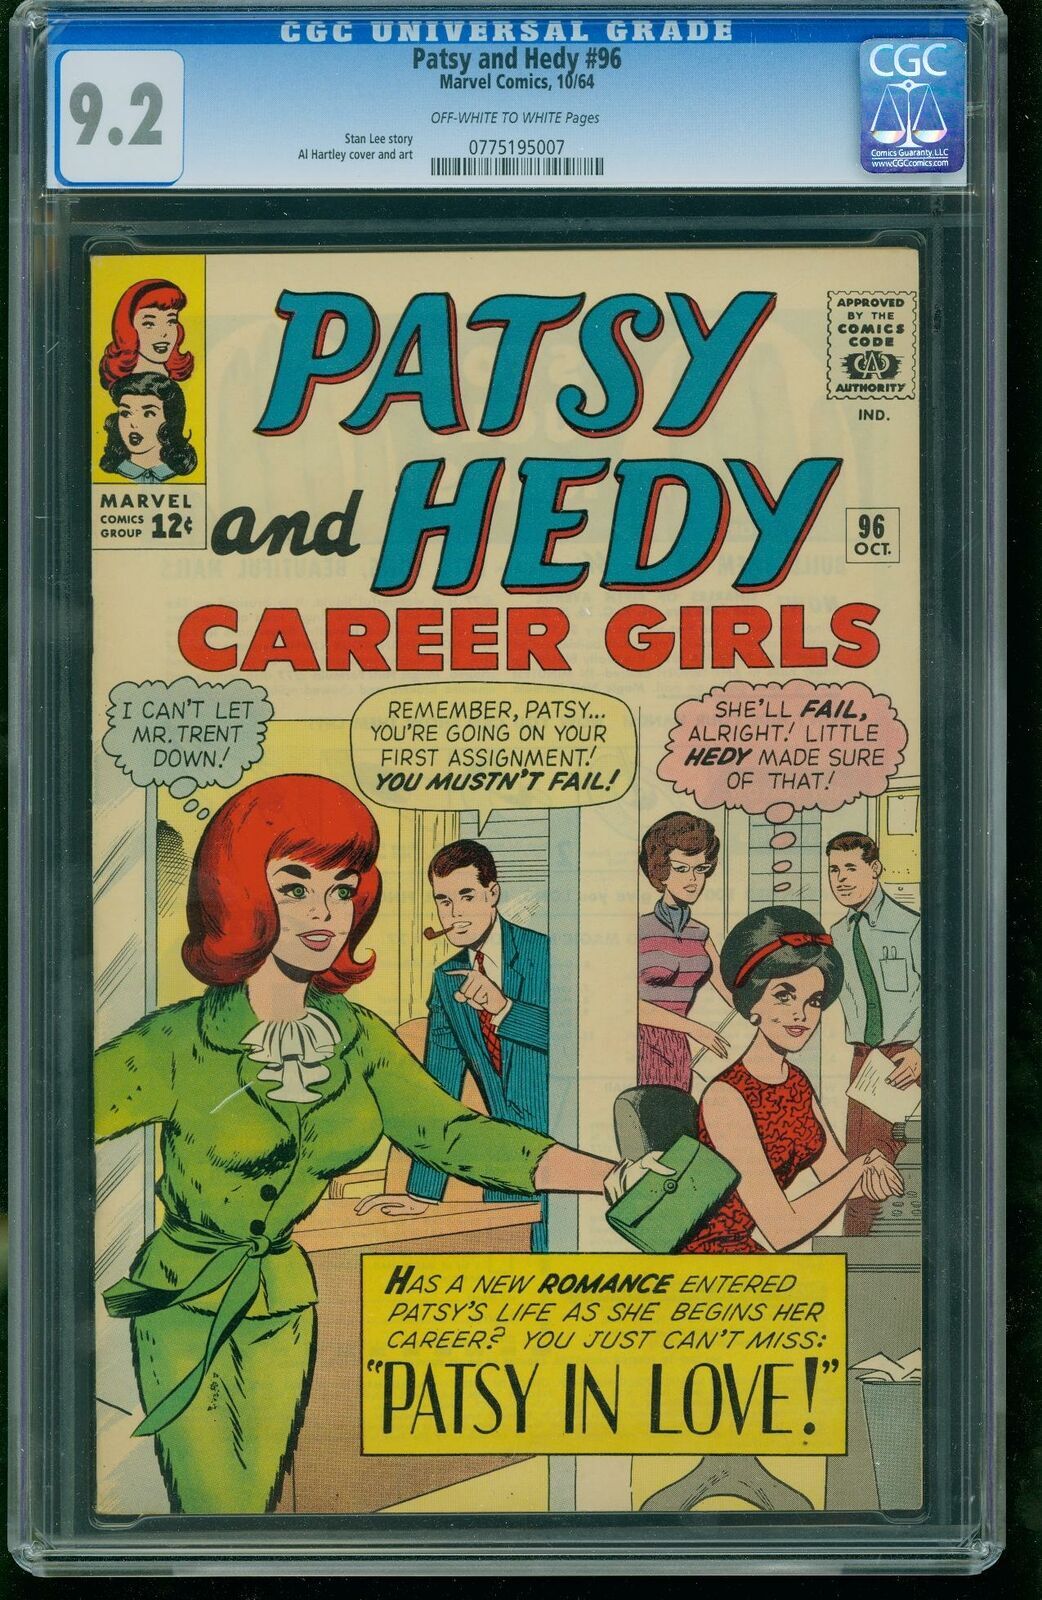 træ volleyball periode Patsy and Hedy #96 1964-Off-White to White-Cgc Graded 9.2 0775195007 |  Comic Books - Bronze Age, Marvel, Rom, Romance / HipComic